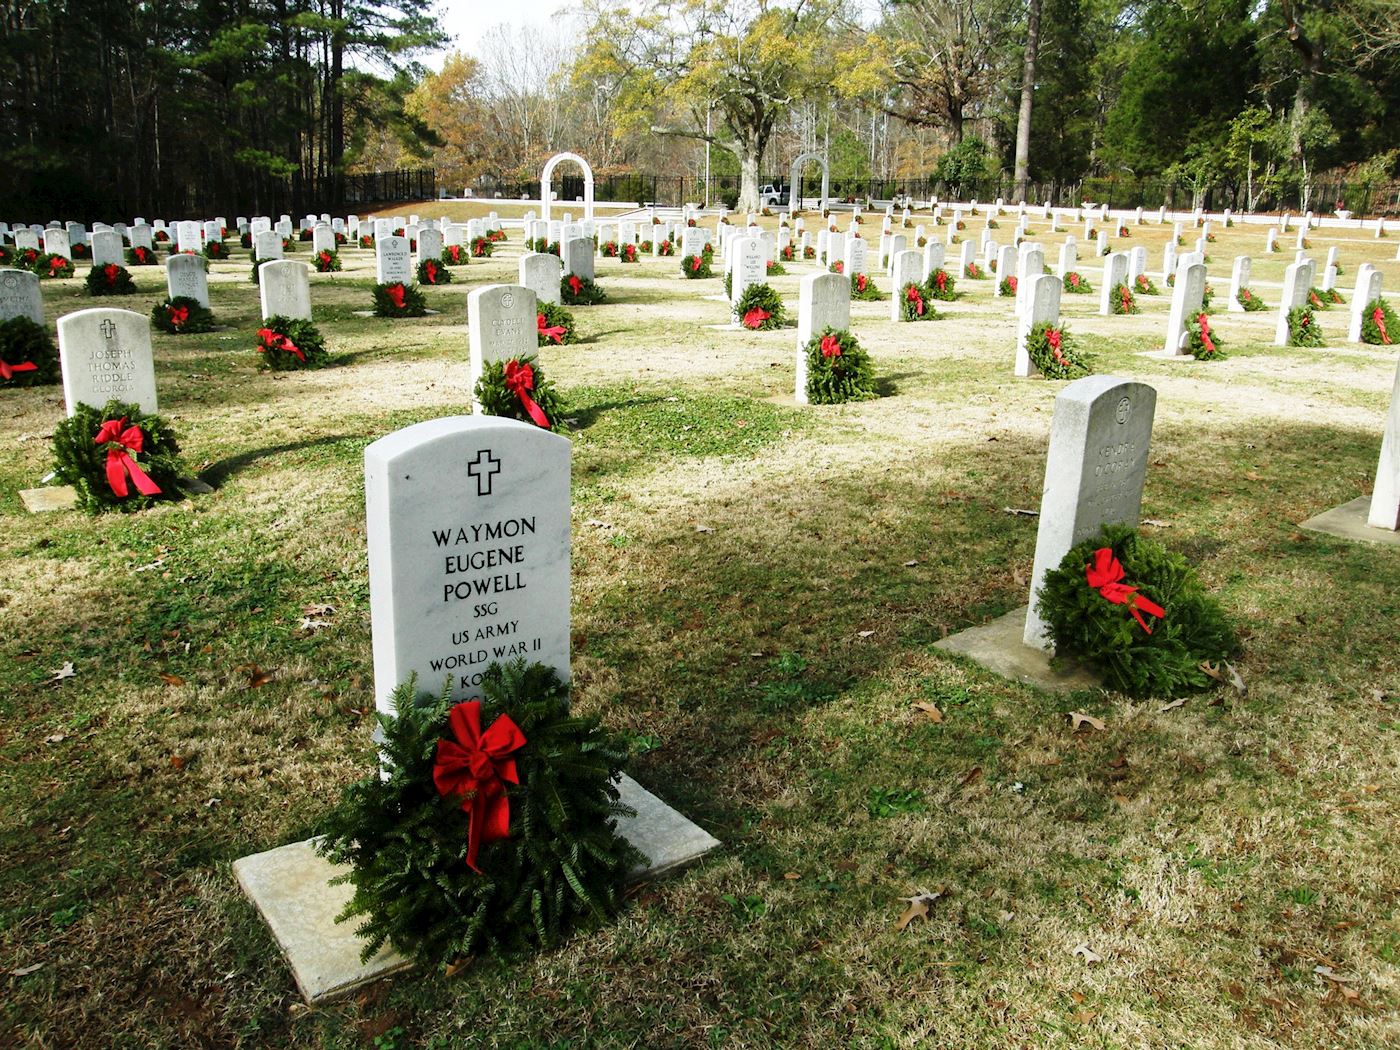 The Fort McClellan (Ala.) Military Cemetery following a Wreaths Across America Wreath Laying Ceremony.